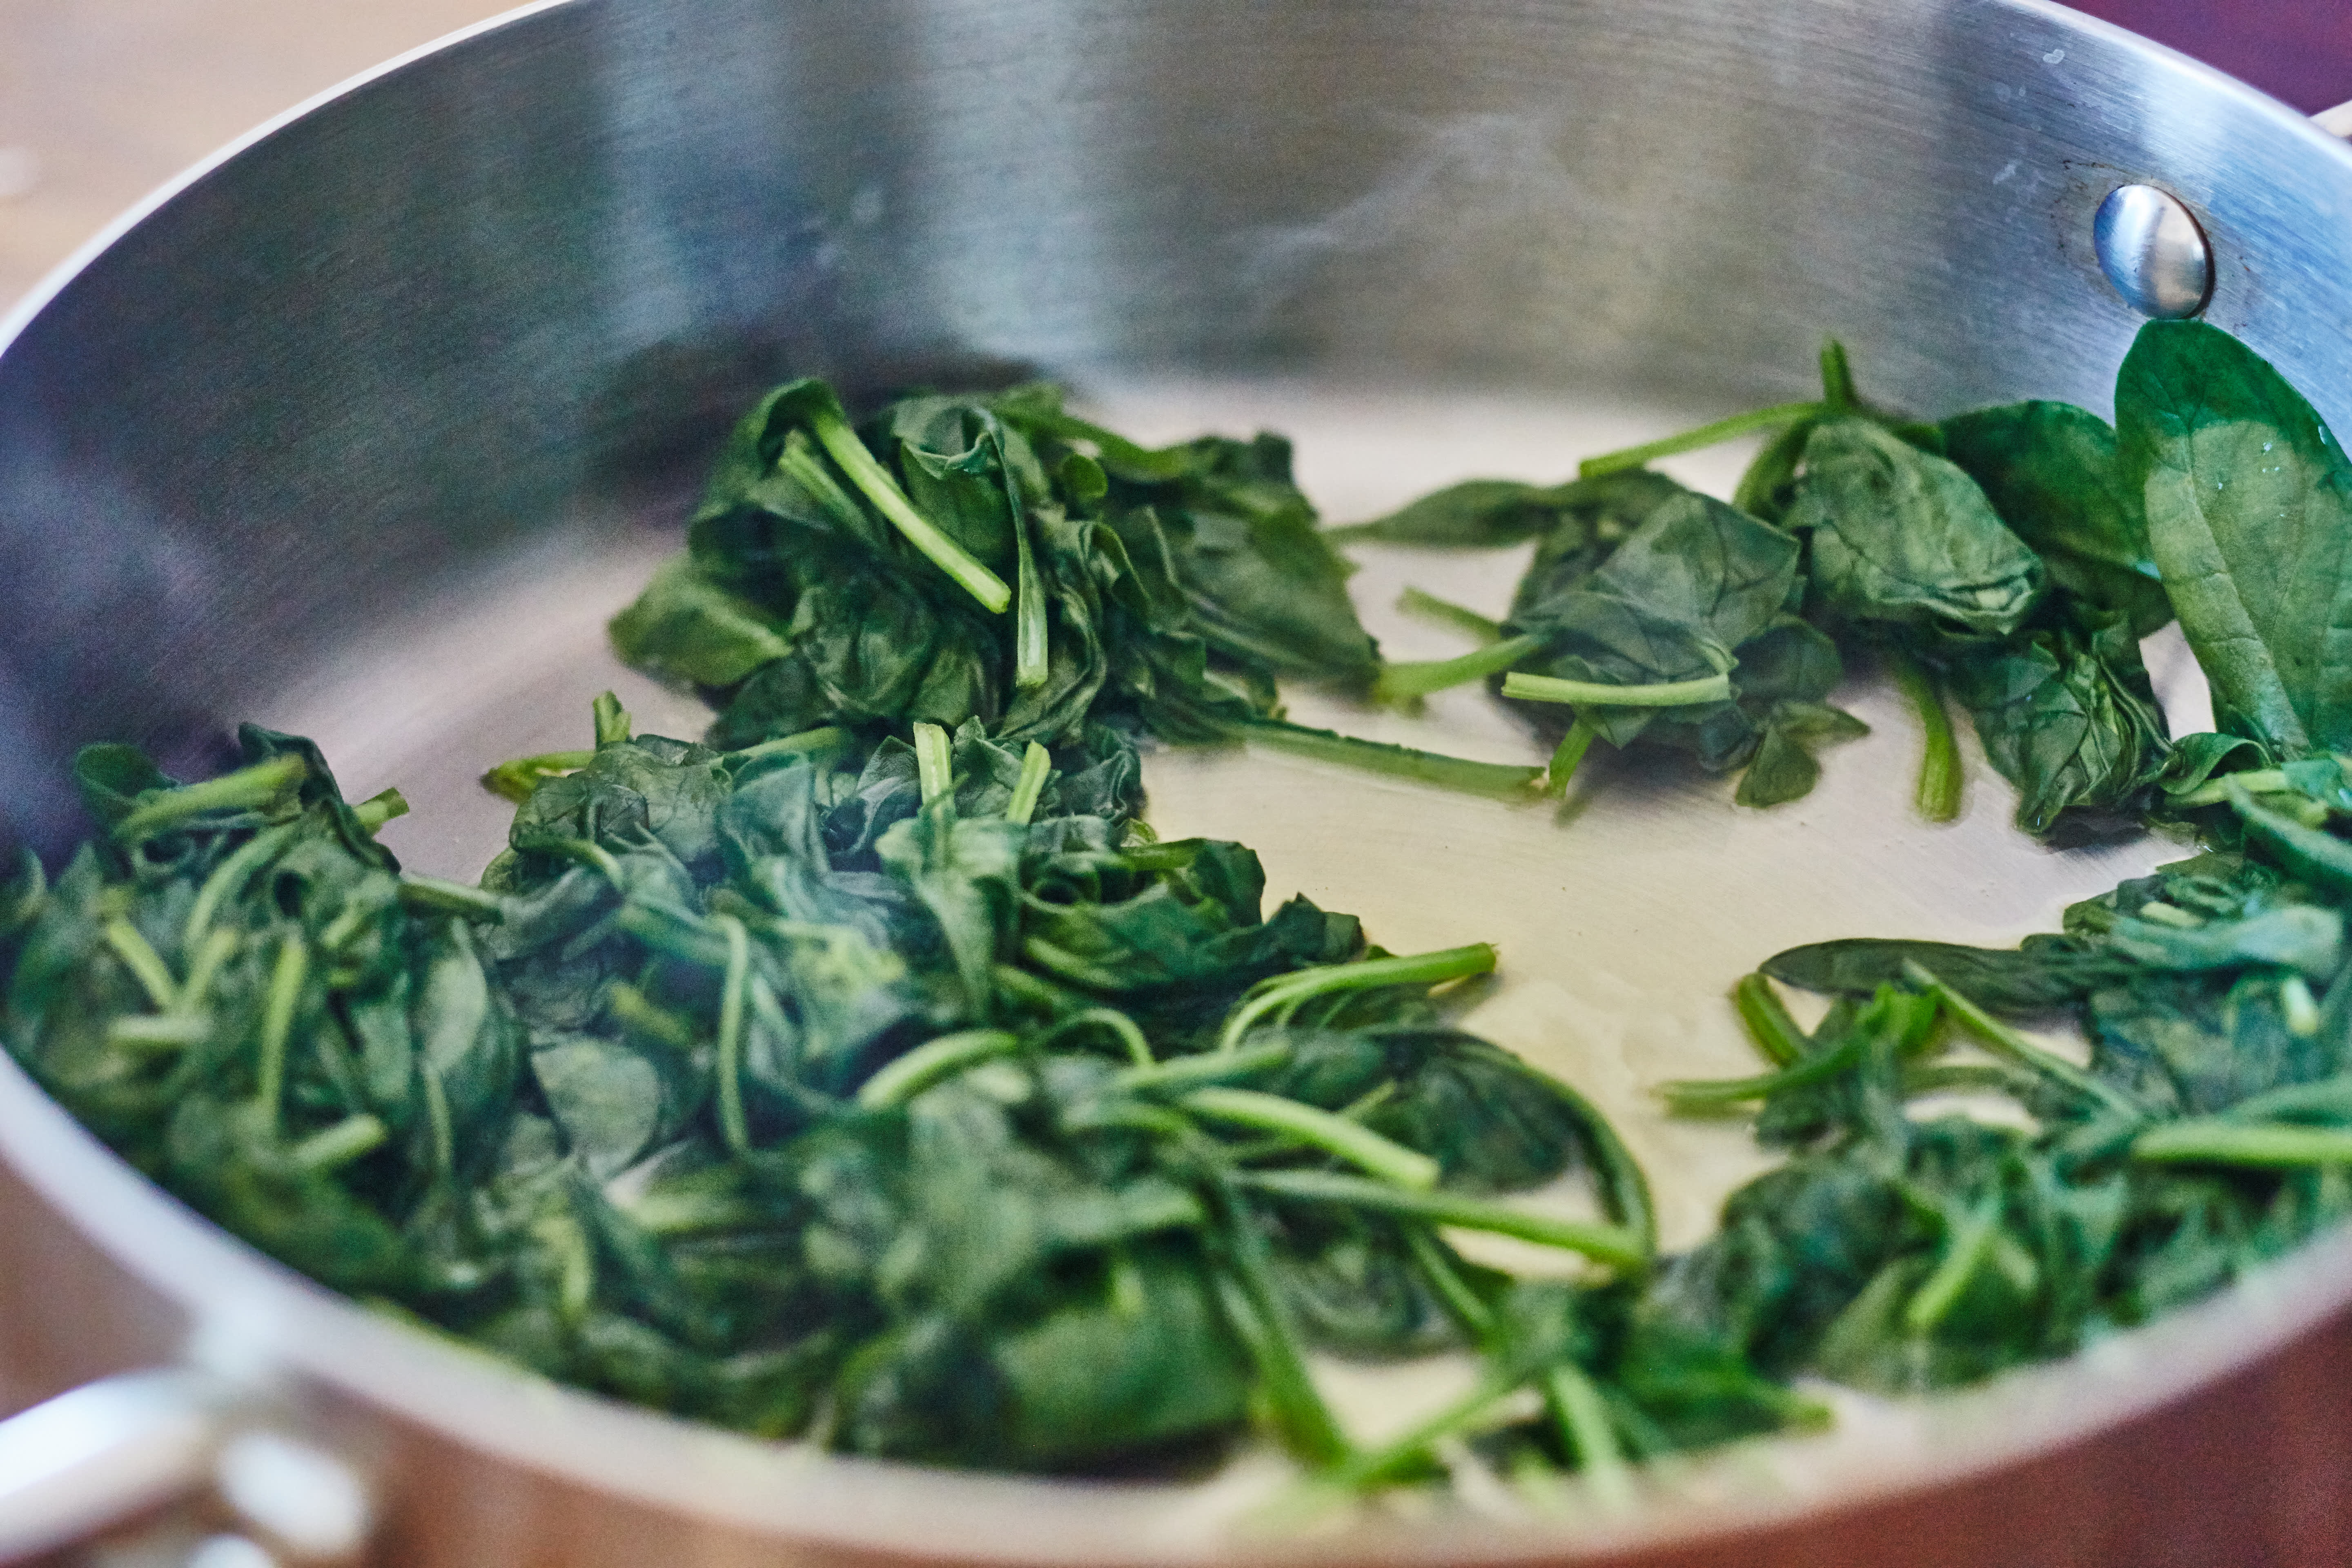 How To Quickly Cook Spinach on the Stovetop